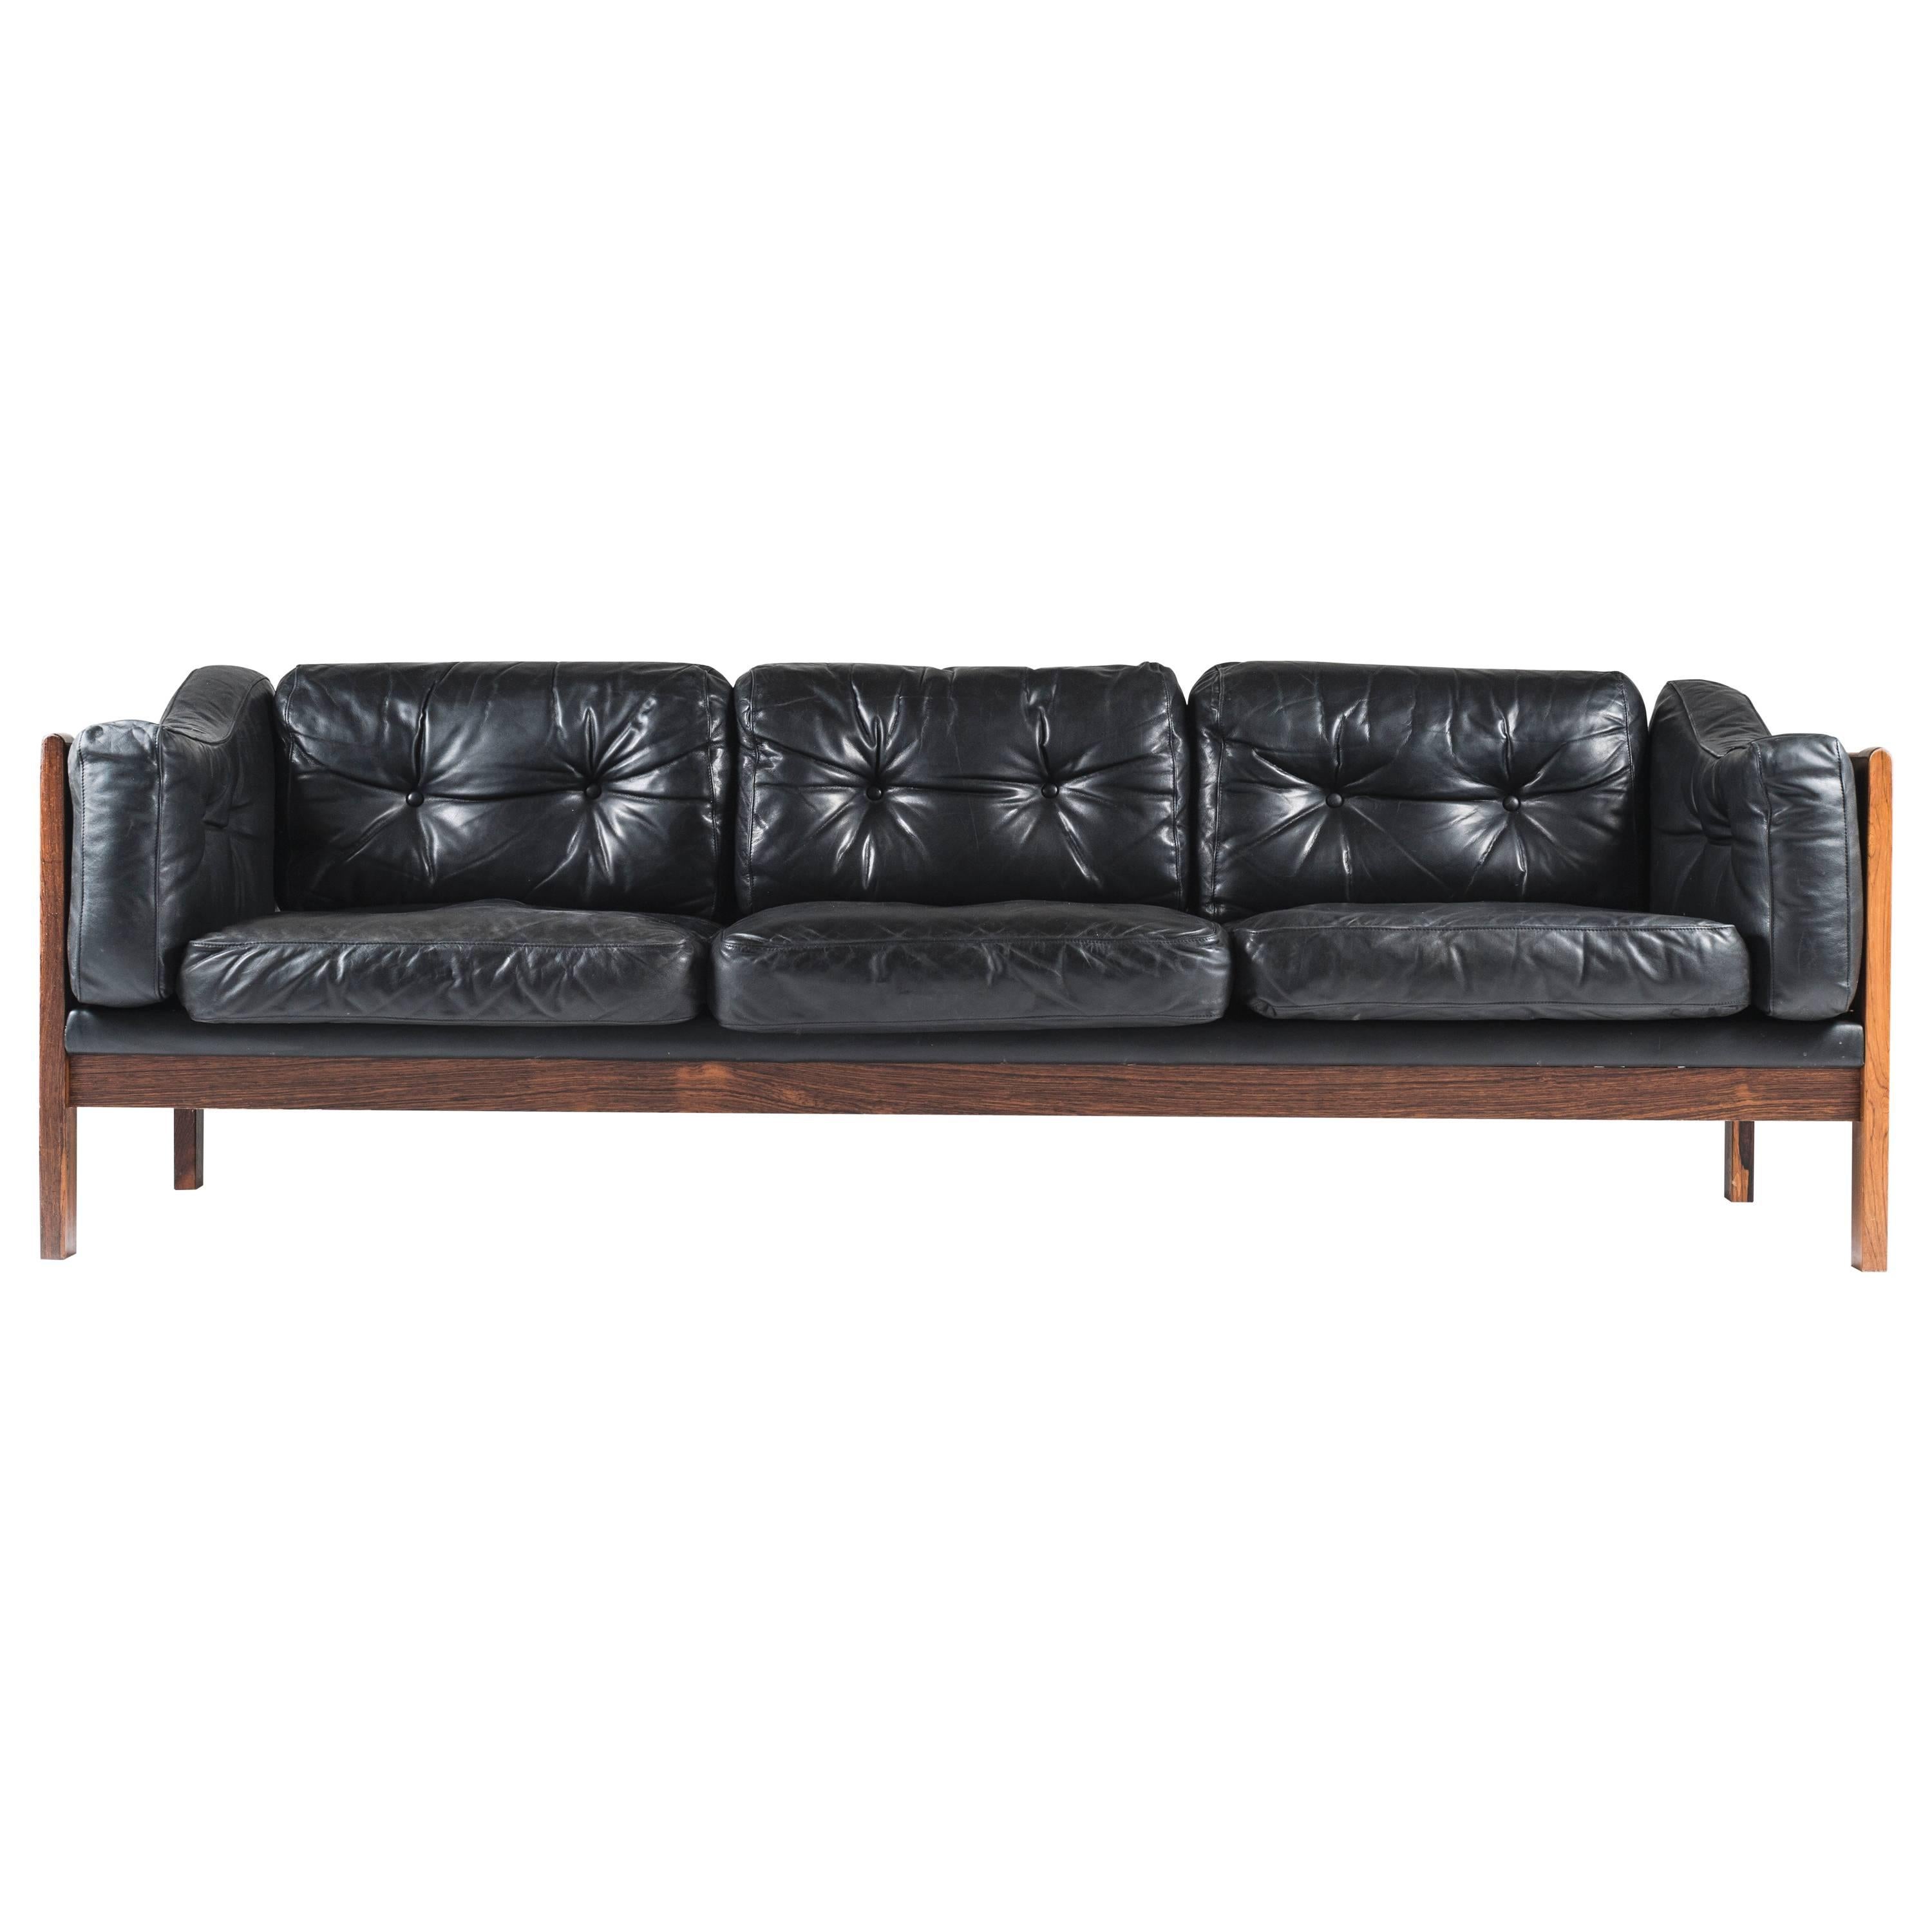 Scandinavian Rosewood and Black Leather Sofa "Monte Carlo", 1965